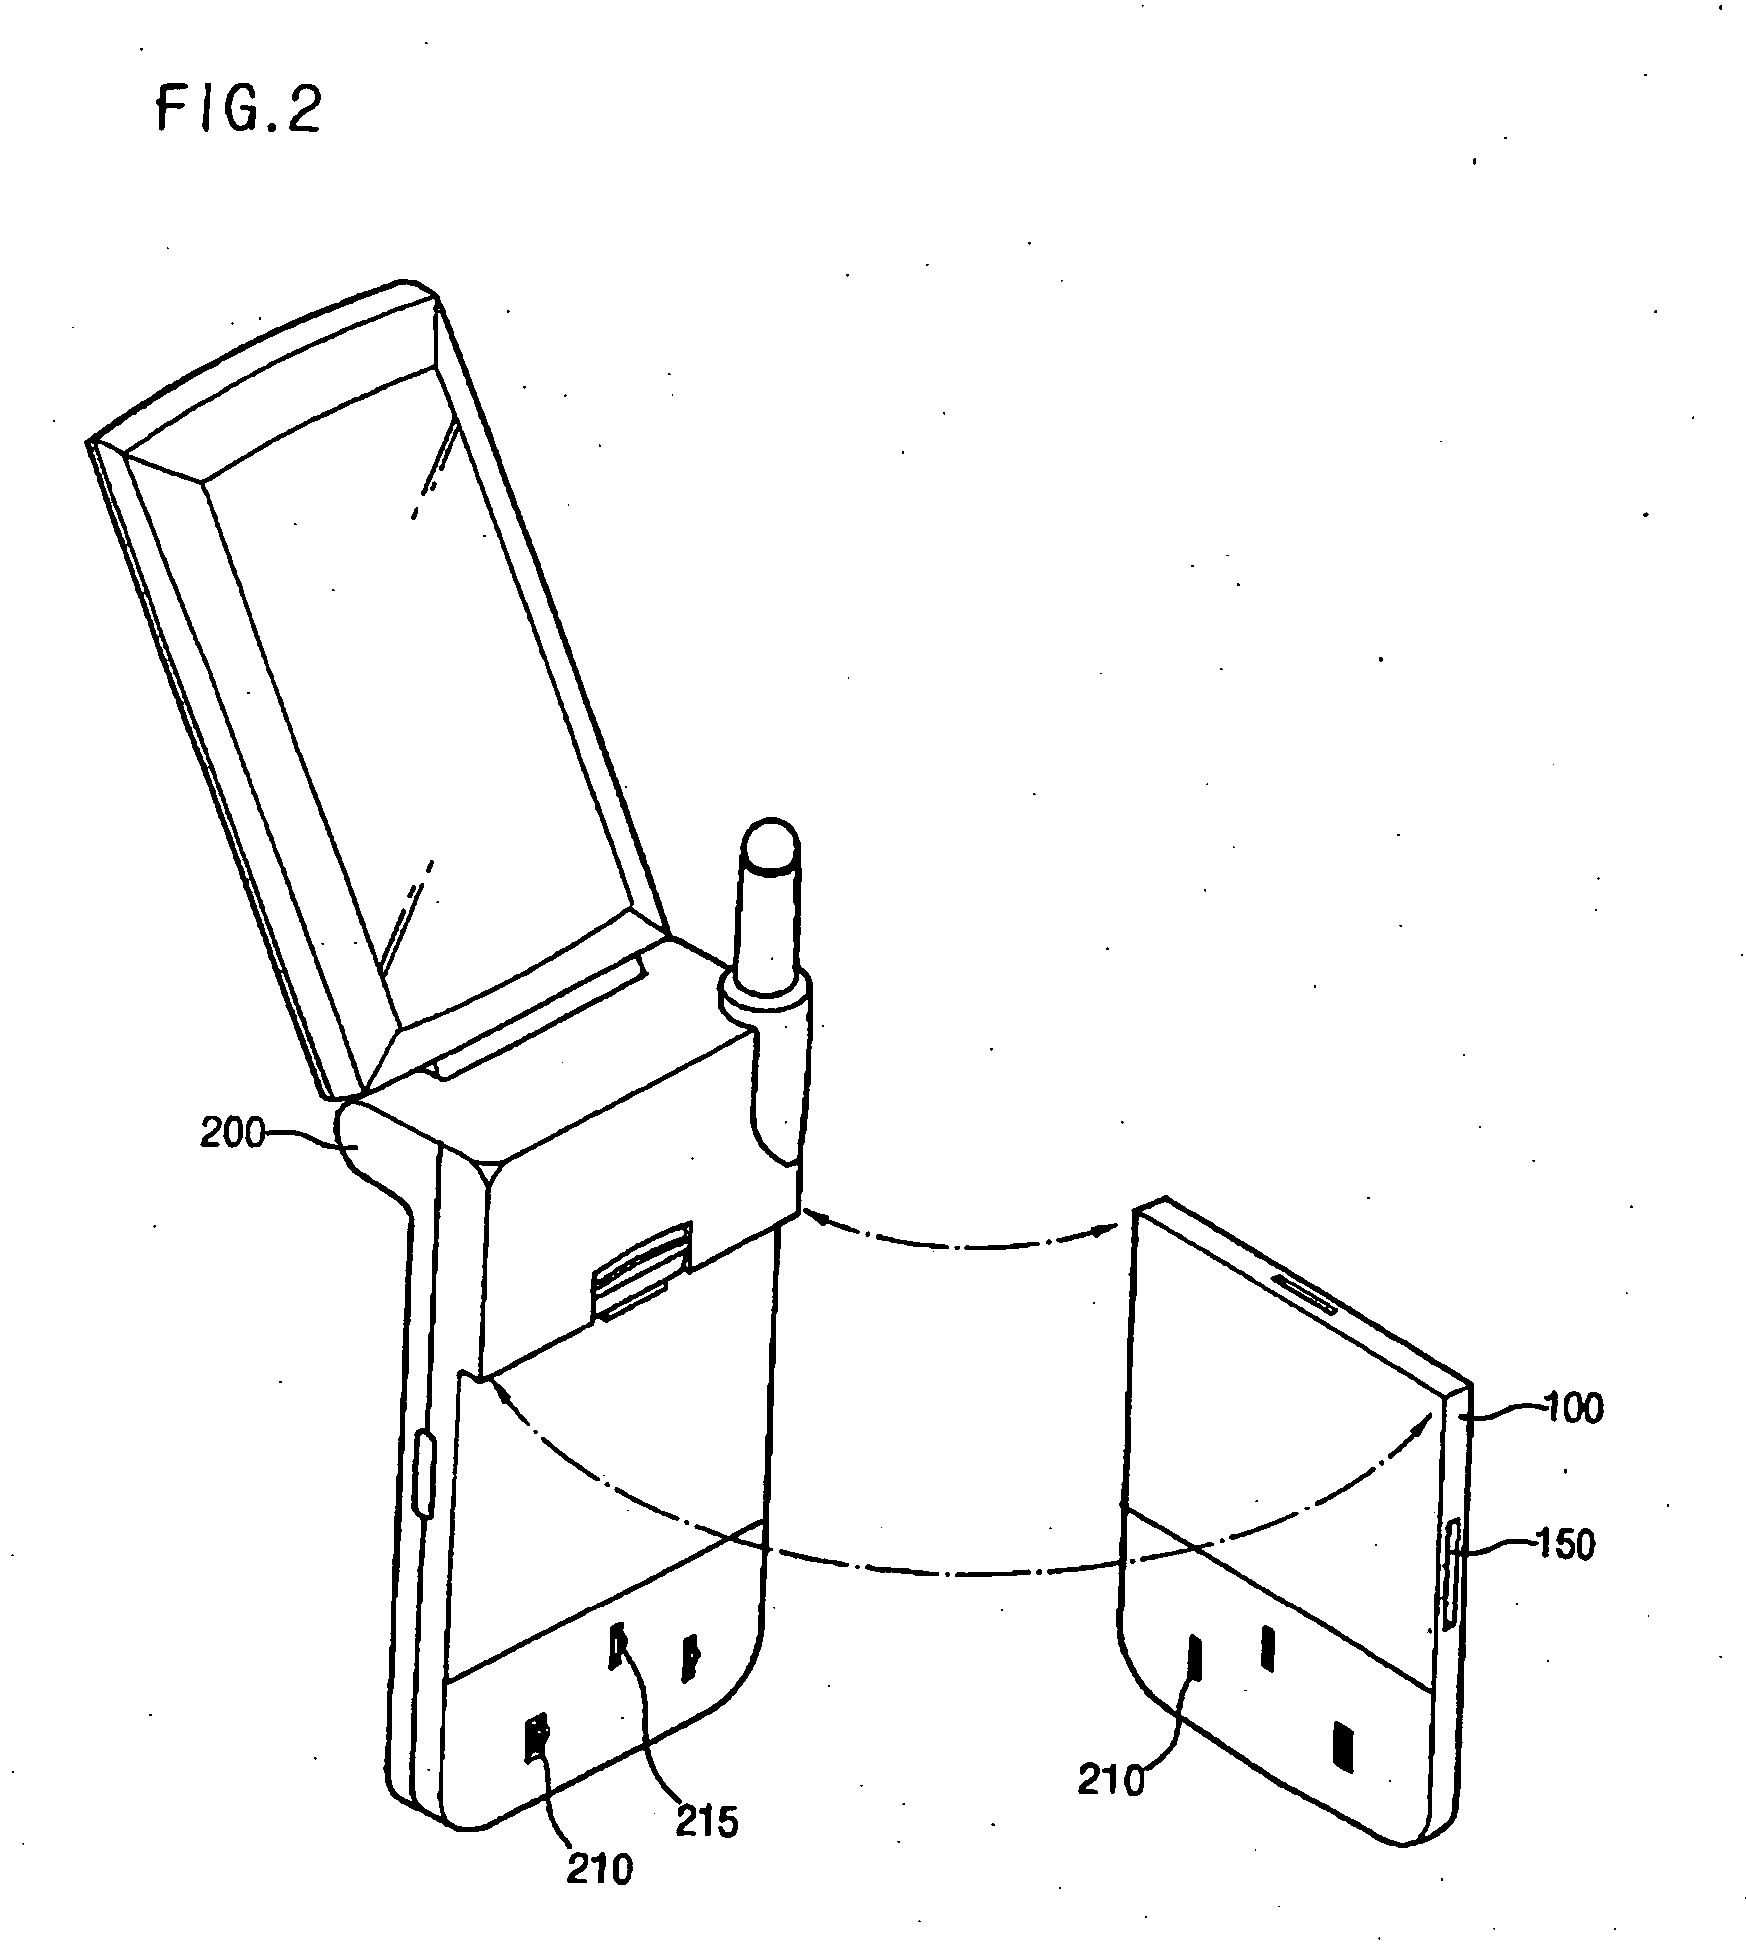 Battery pack of a mobile communication terminal to be capable of reading output of bio-sensors and self-diagnosis system